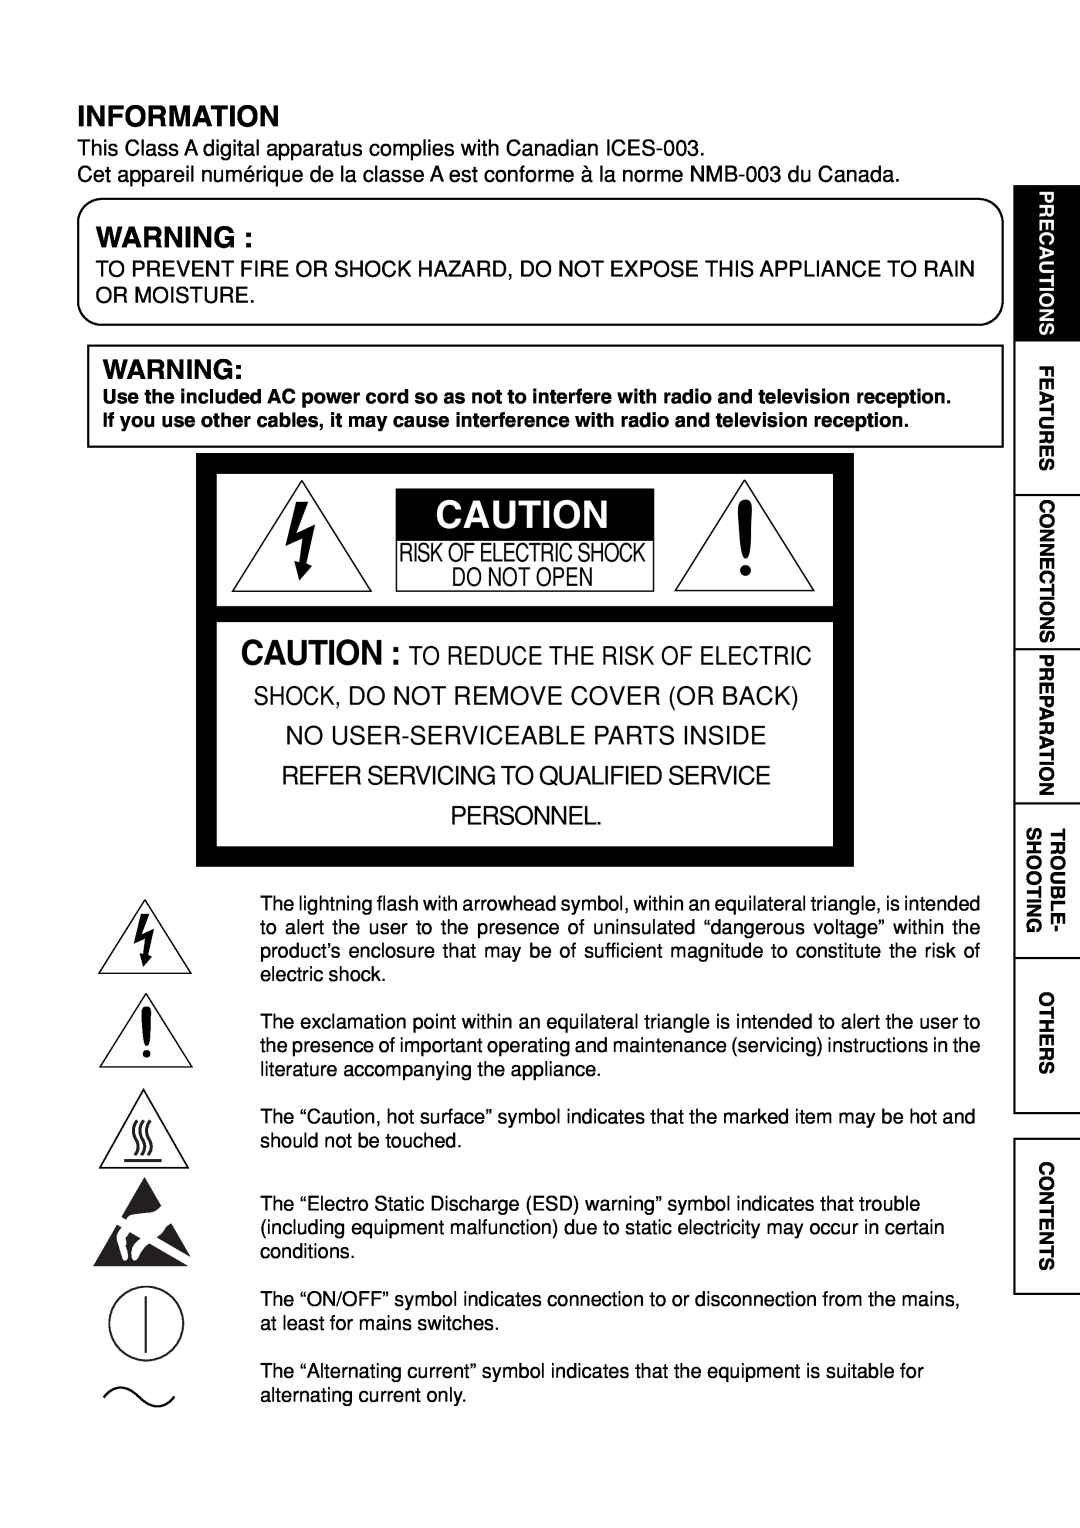 Mitsubishi Electronics CP9600DW-S Information, Risk Of Electric Shock Do Not Open, Caution To Reduce The Risk Of Electric 